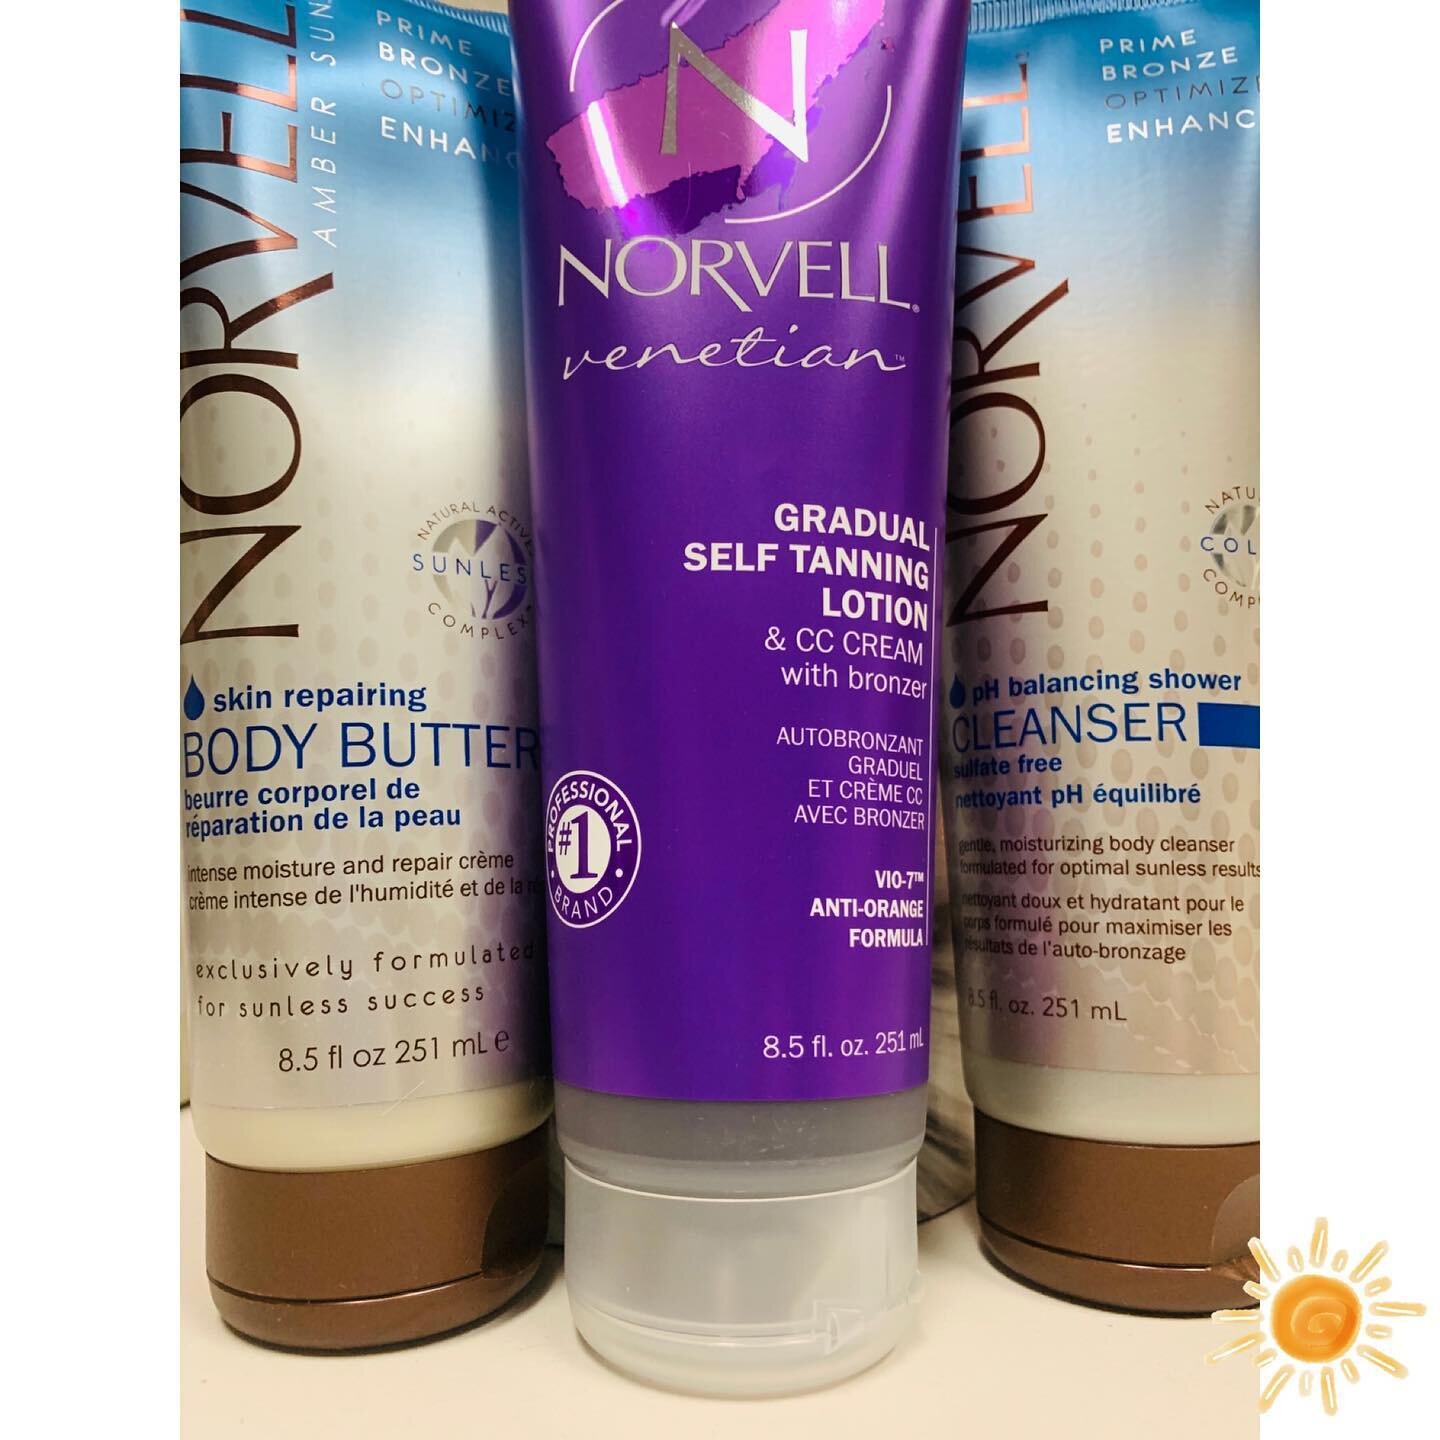 A few of my FAVORITE post tan products 😊 
2. The Norvell Body Butter is a thick lotion that is so moisturizing it helps your skin stay hydrated throughout the duration of your tan to ensure the best results.
2. The Norvell Venetian Gradual Self Tann